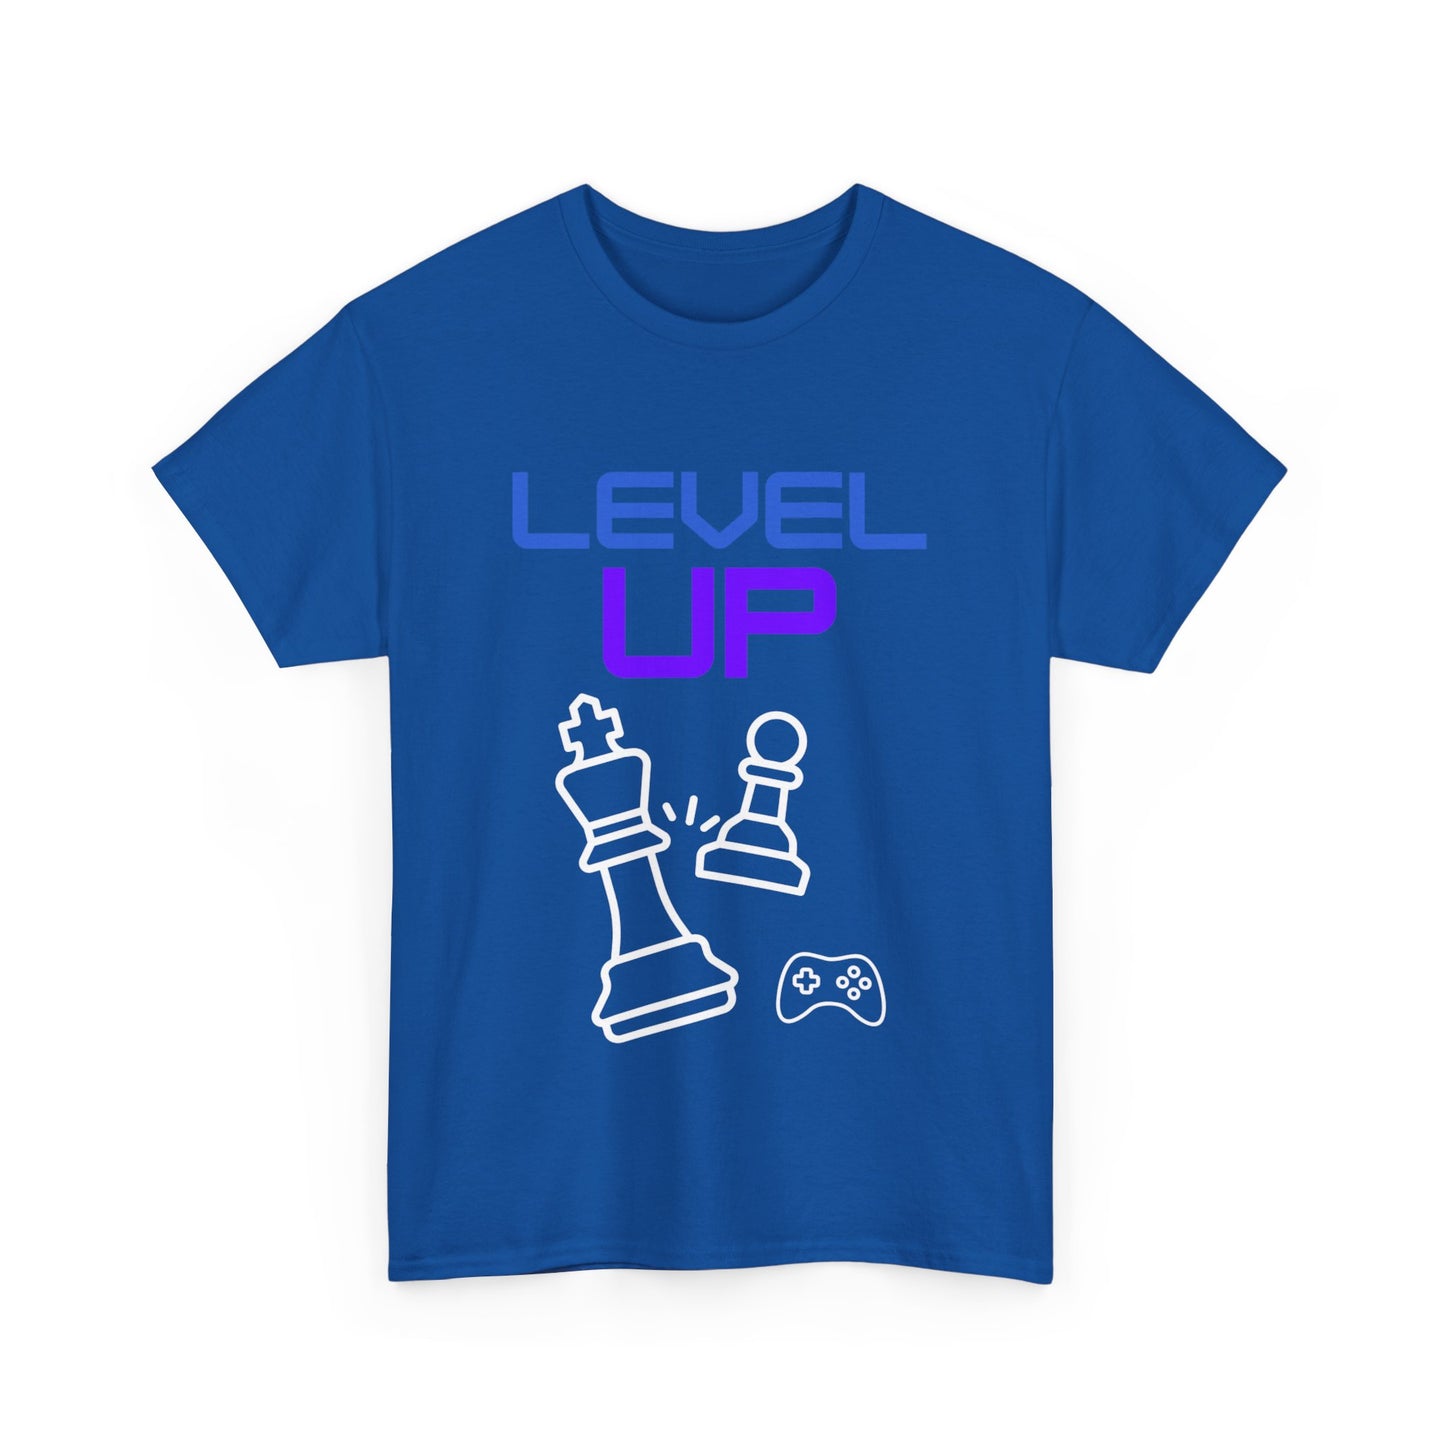 Level Up T-Shirt, Gamer Tee 100% Cotton, 3 Colours, AUS - USA - CAN warehouse, free post.